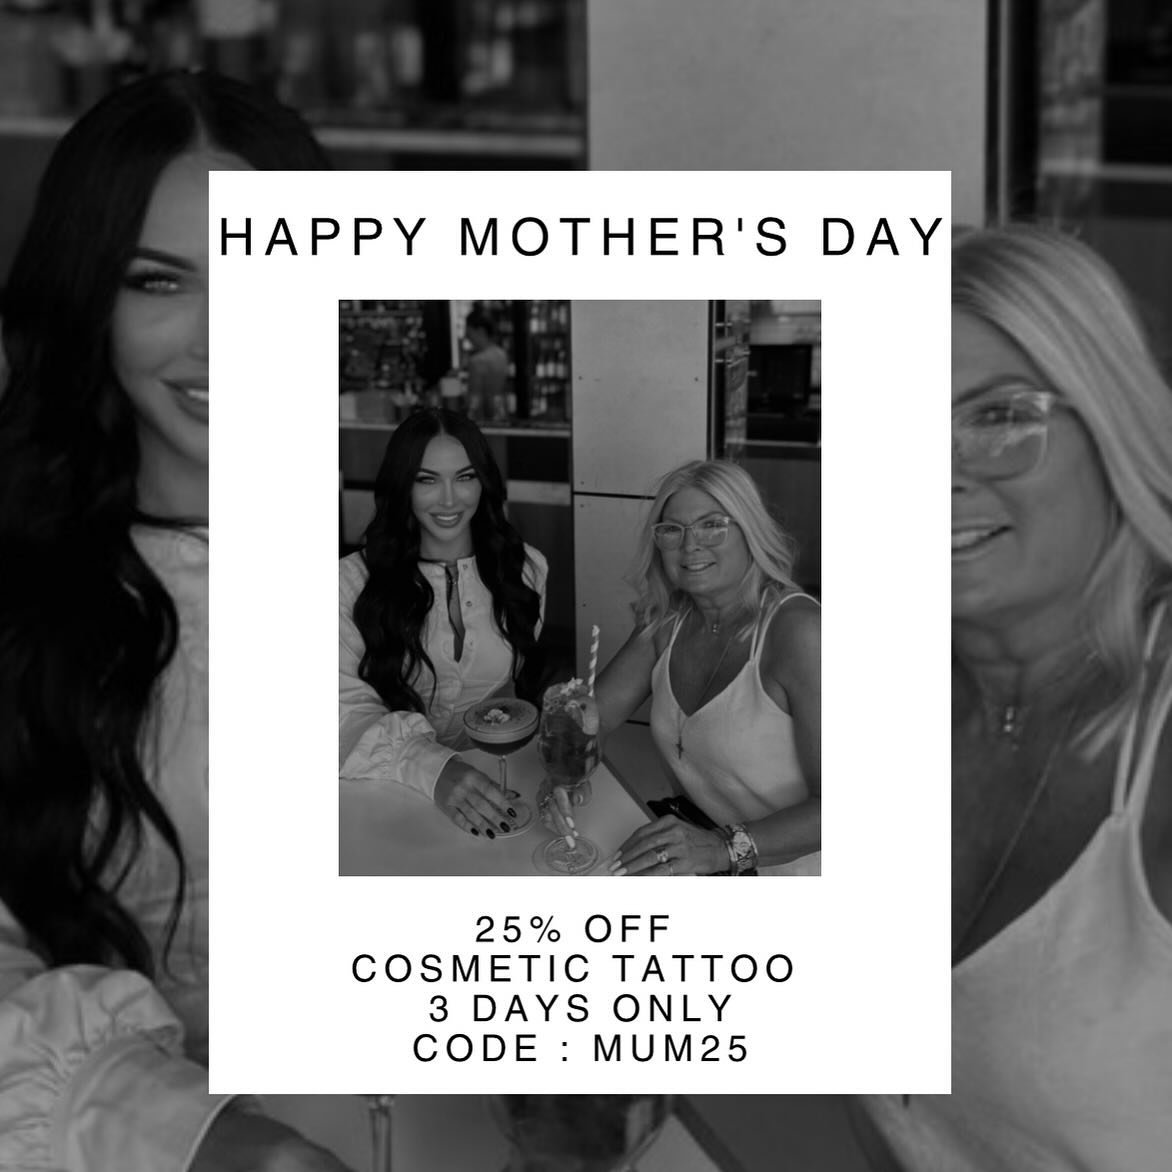 MOTHERS DAY  SALE 🌸💕

CODE : MUM25

✨25% off Cosmetic tattooing 
✨3 DAYS ONLY 
✨Must be 18 years old and over 
✨Not available on already booked appointments 
✨Not available on already discounted treatments 
✨Deposits and appointment bookings must b